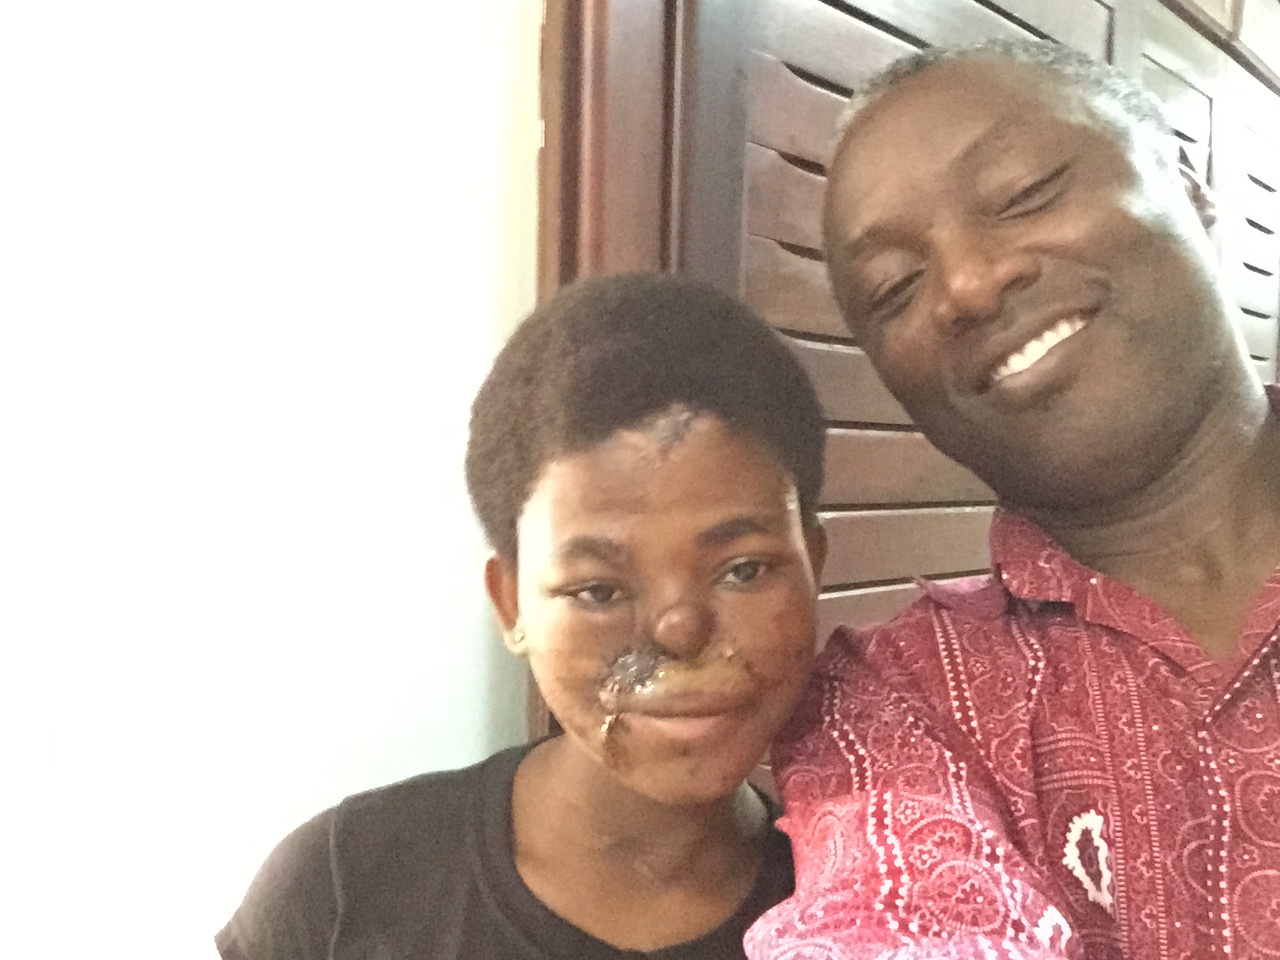 Here is an updated picture of Naomi with Dr. Boahene following our recent trip to Ghana. She underwent reconstruction of the lip. The next stage of surgery is reconstruction of her nose and forehead.